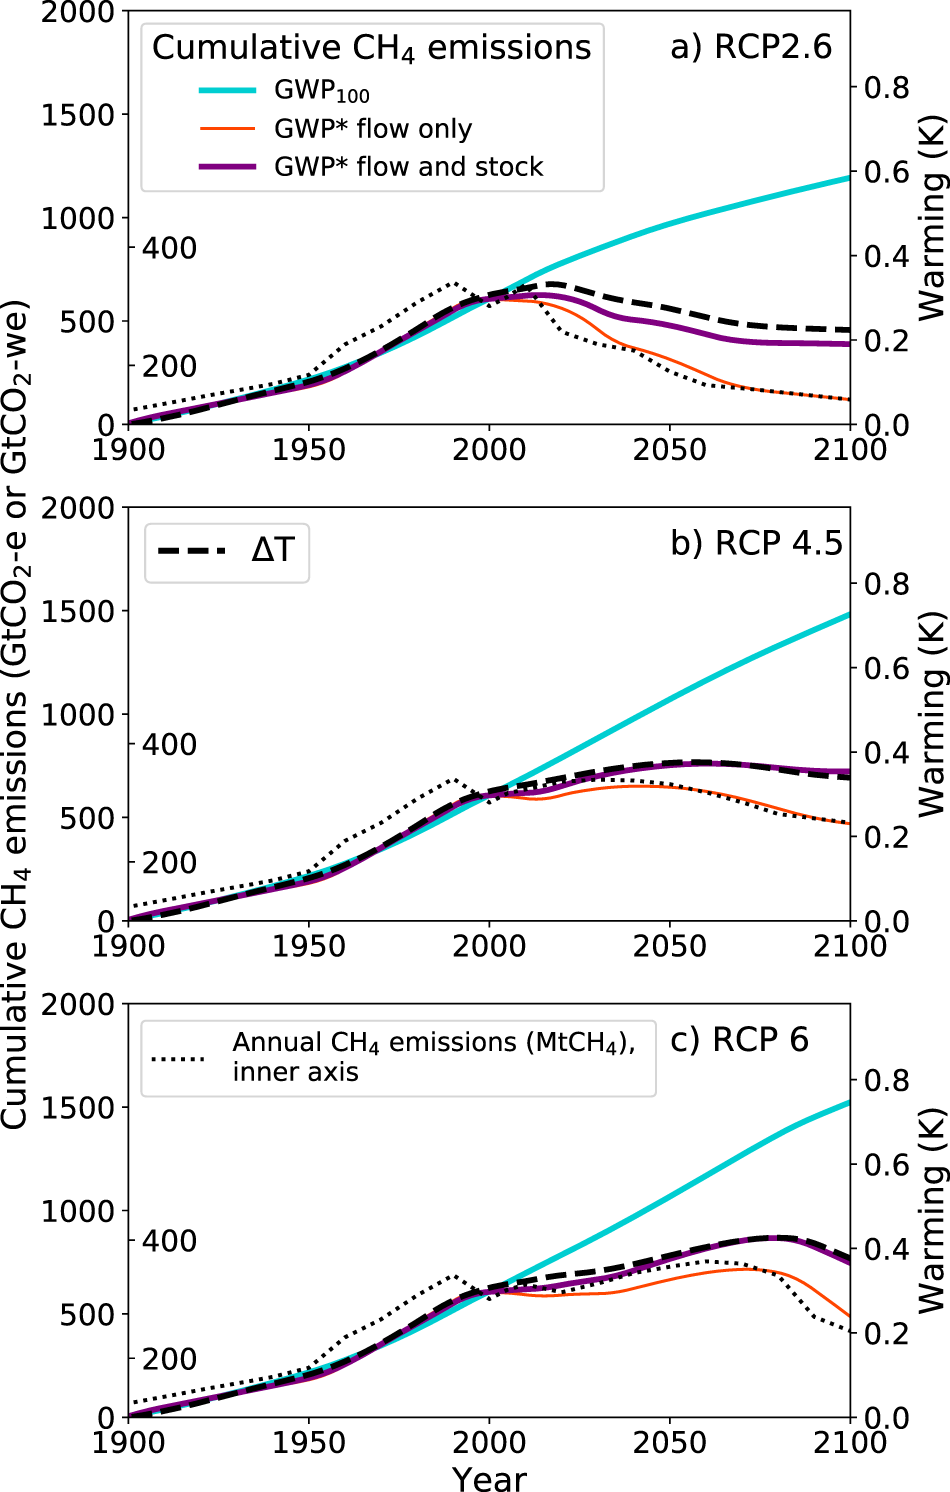 RealClimate: The CO2 problem in six easy steps (2022 Update)